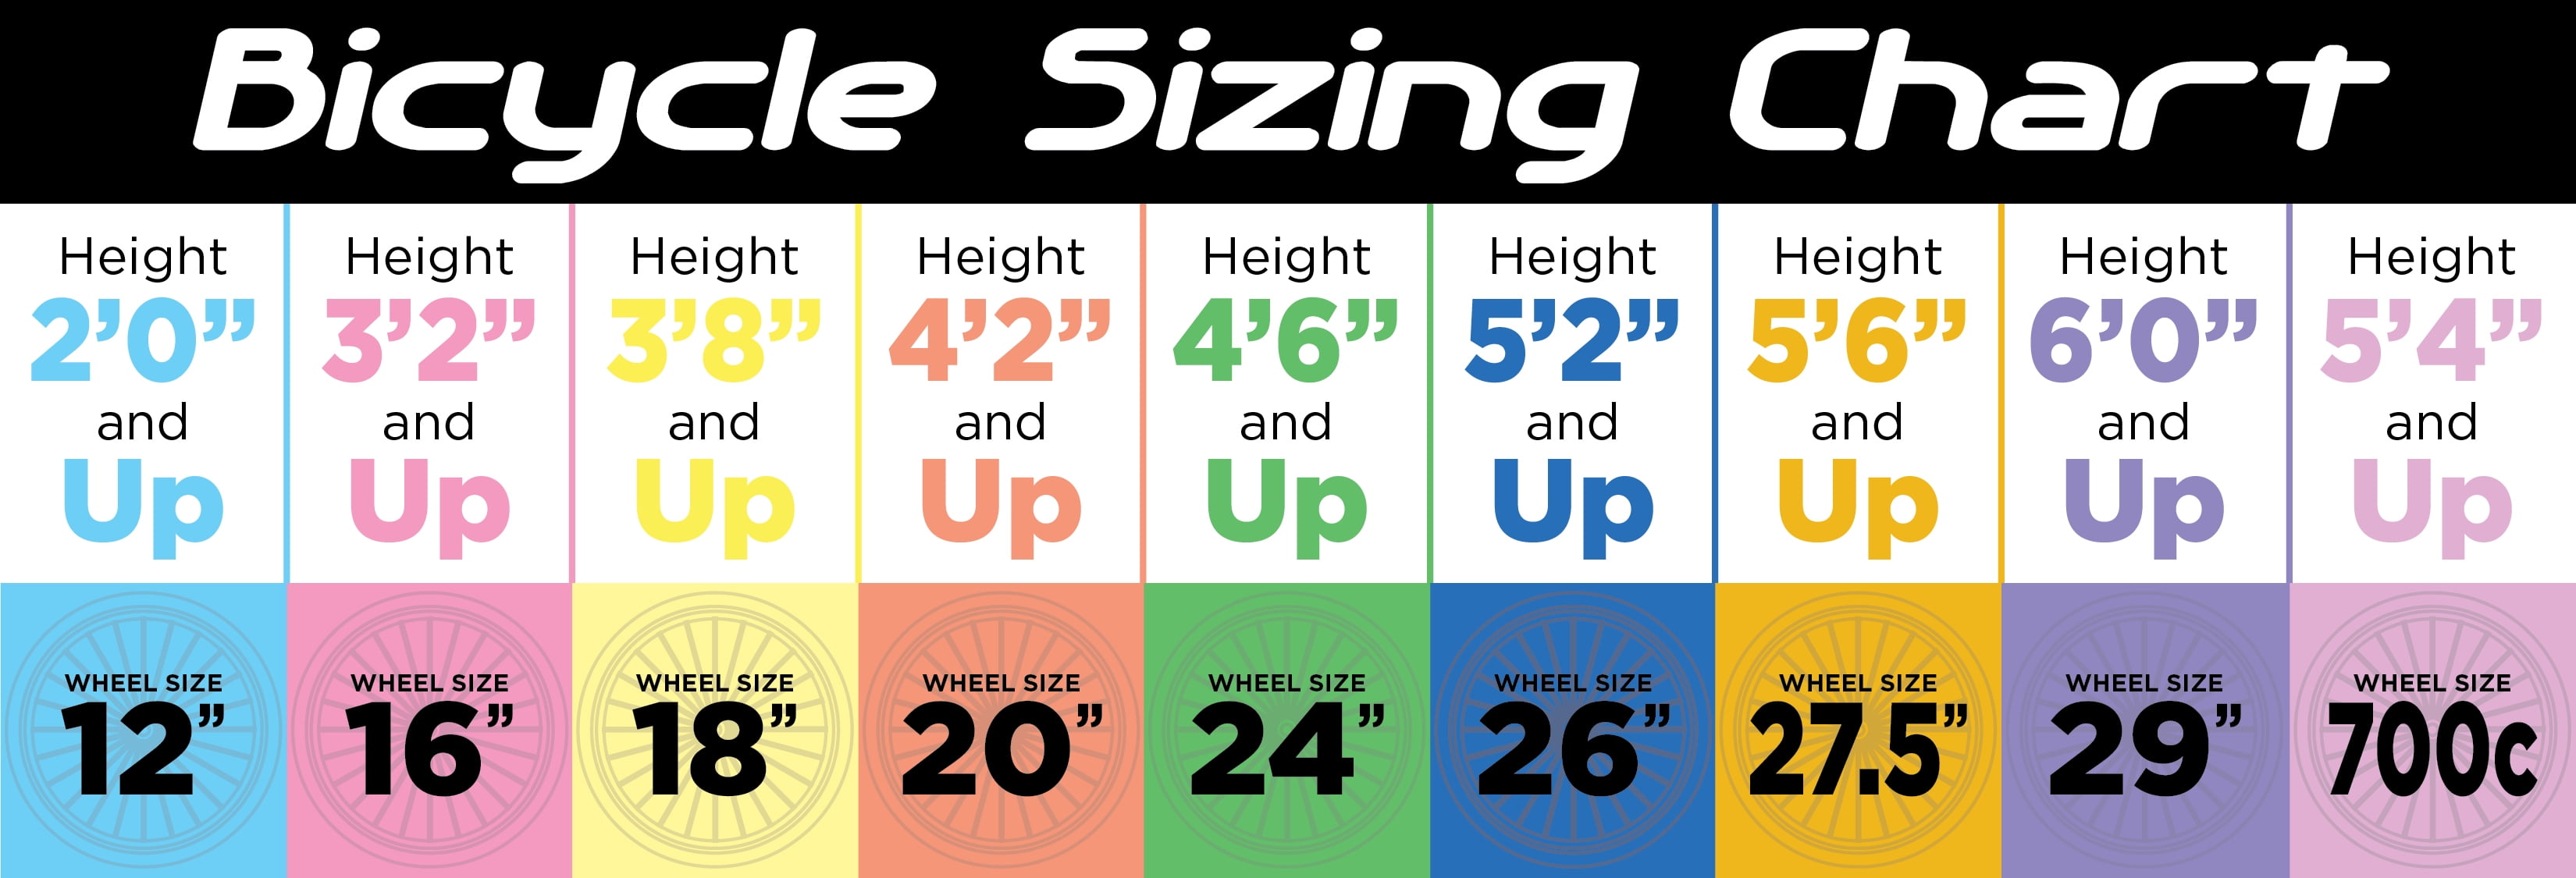 Walmart Size Chart For Costumes